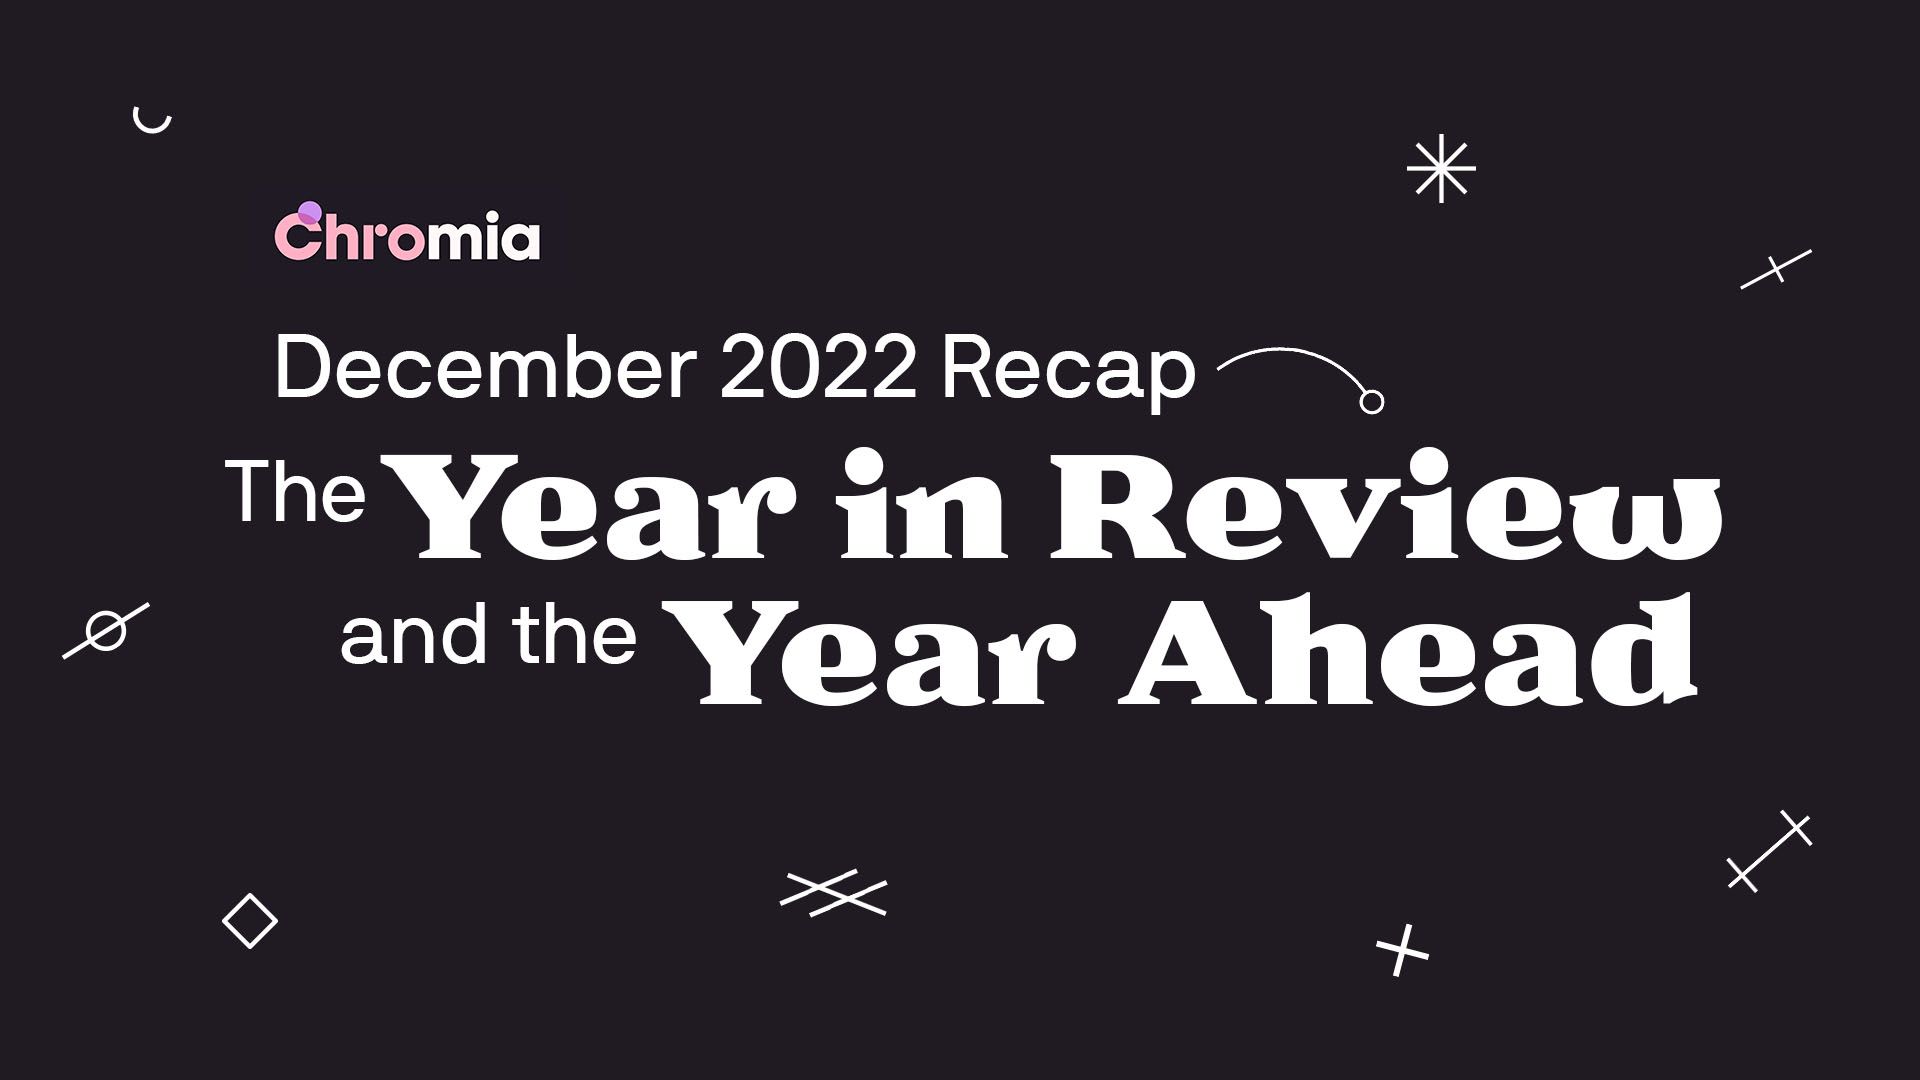 December 2022 Recap - The Year in Review, and the Year Ahead